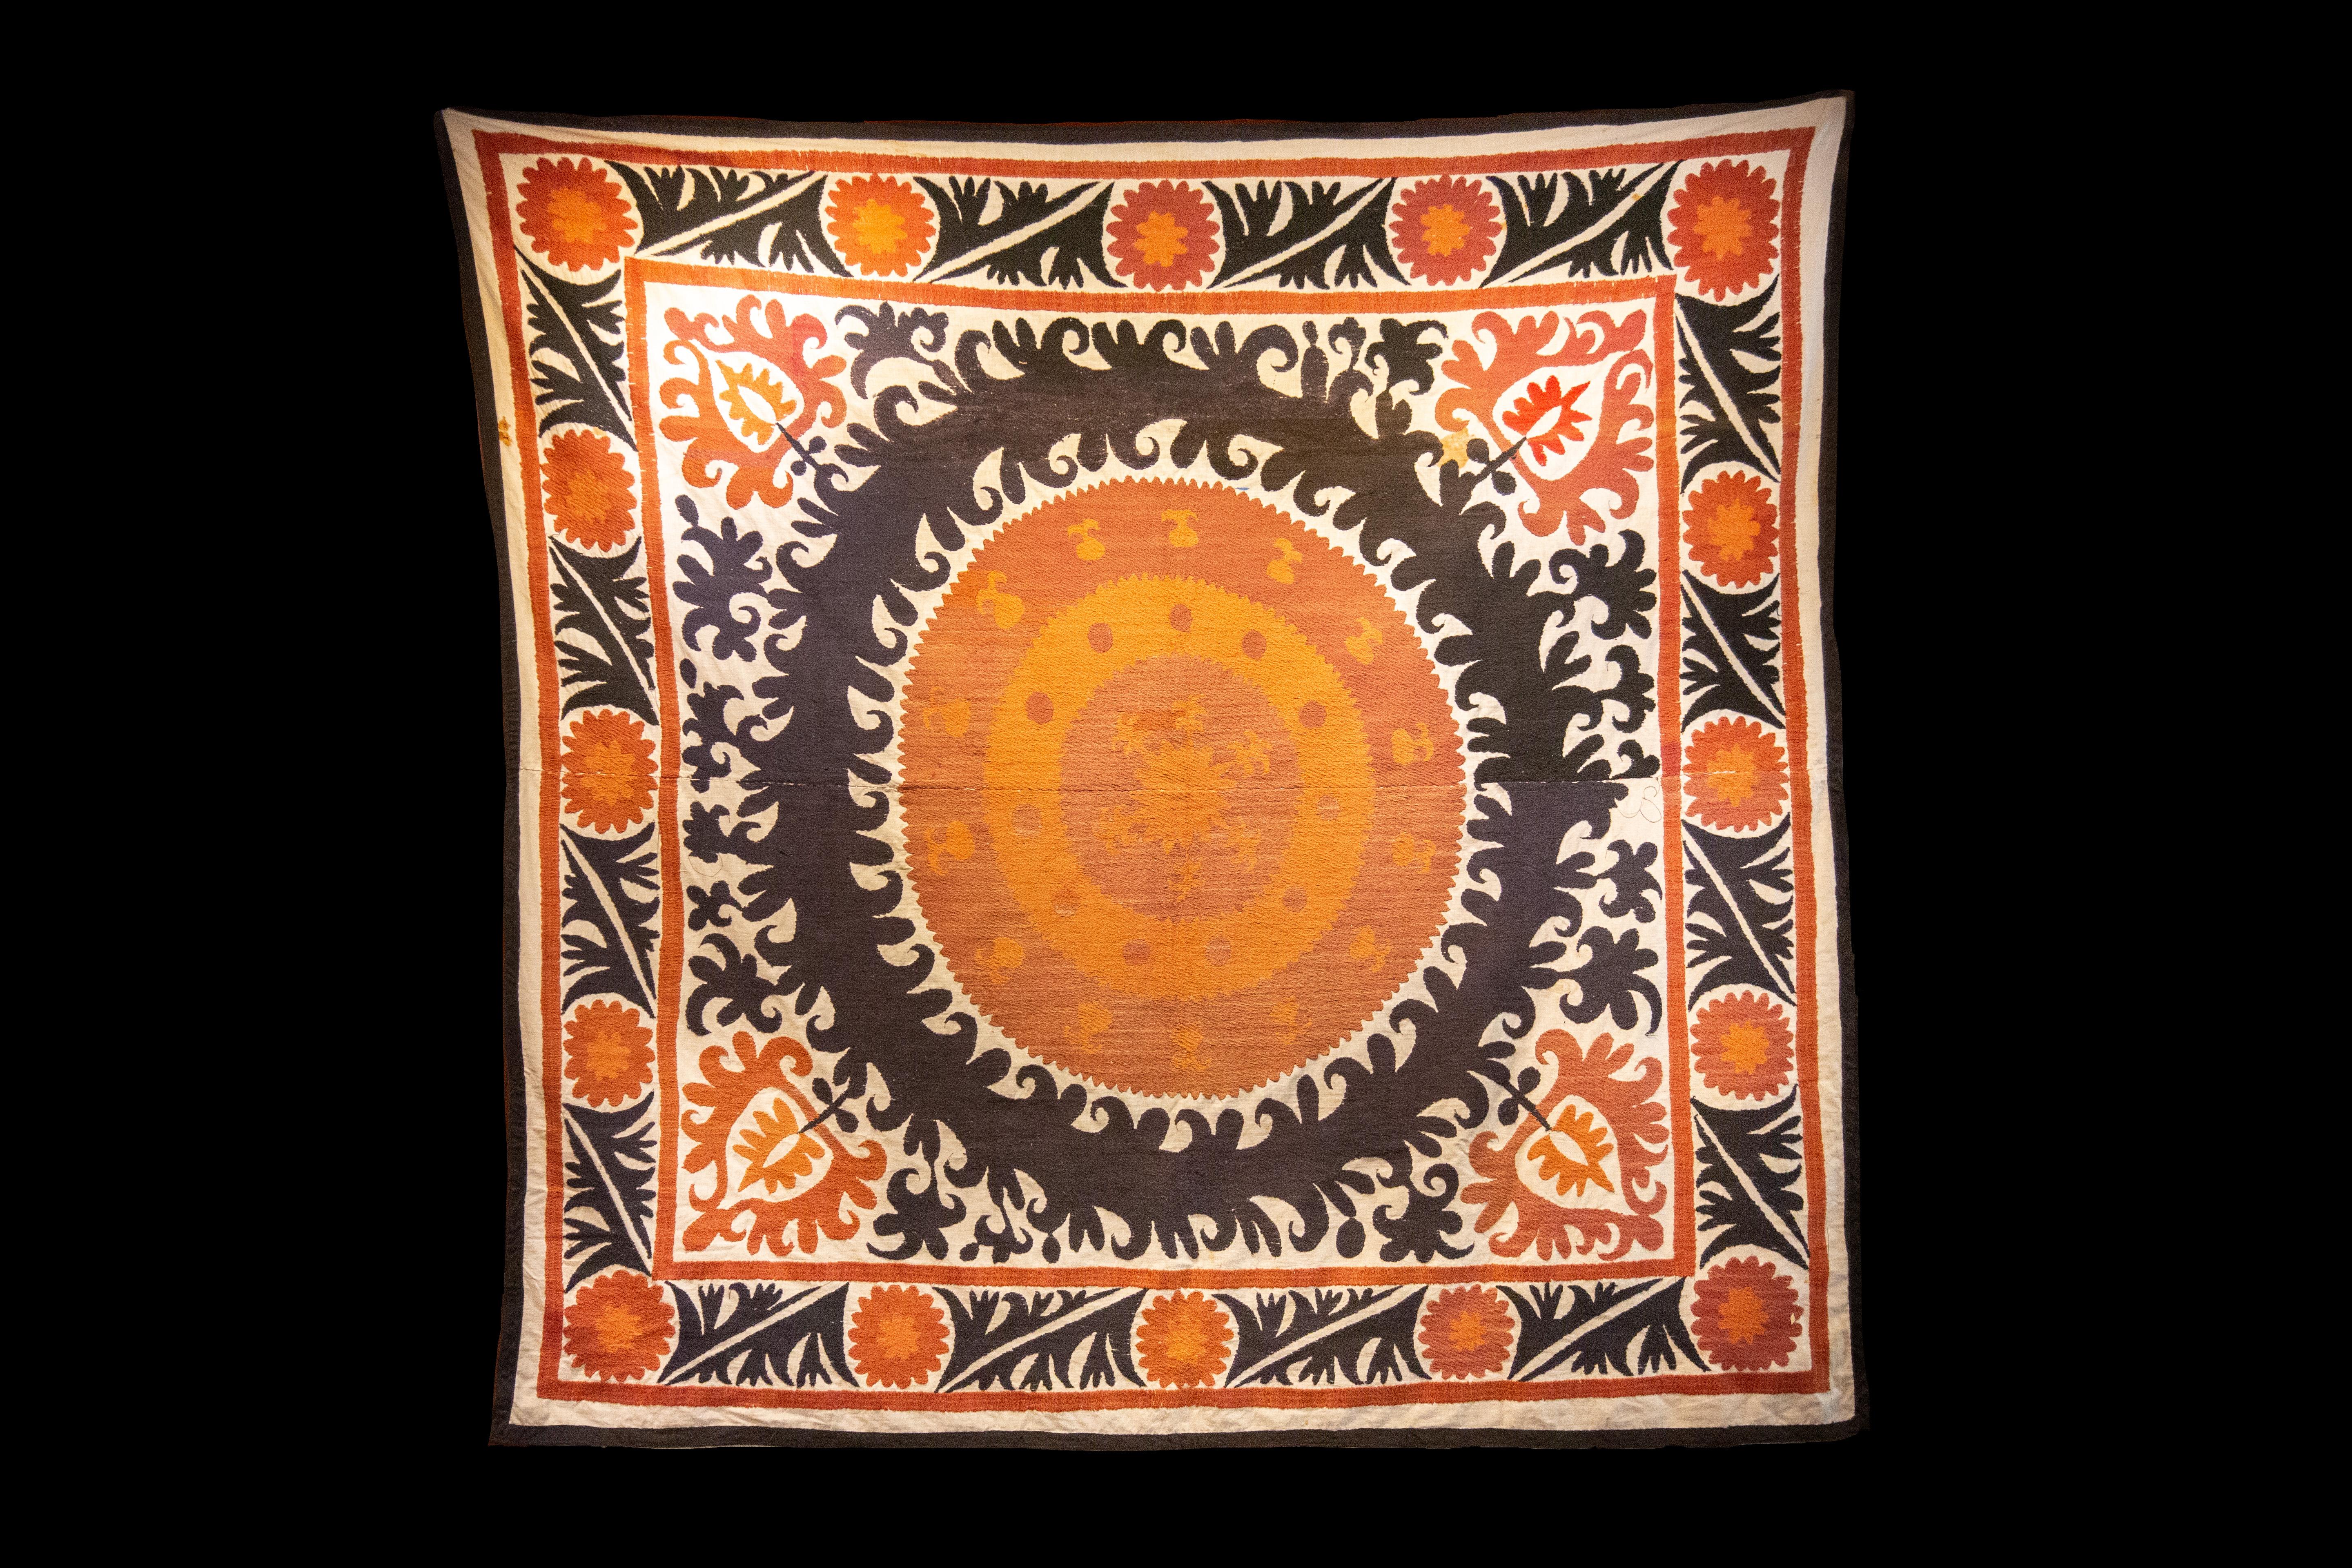 Handmade Vintage Cotton Suzani, Orange, Charcoal and Red geometric designs.

Measures: 66